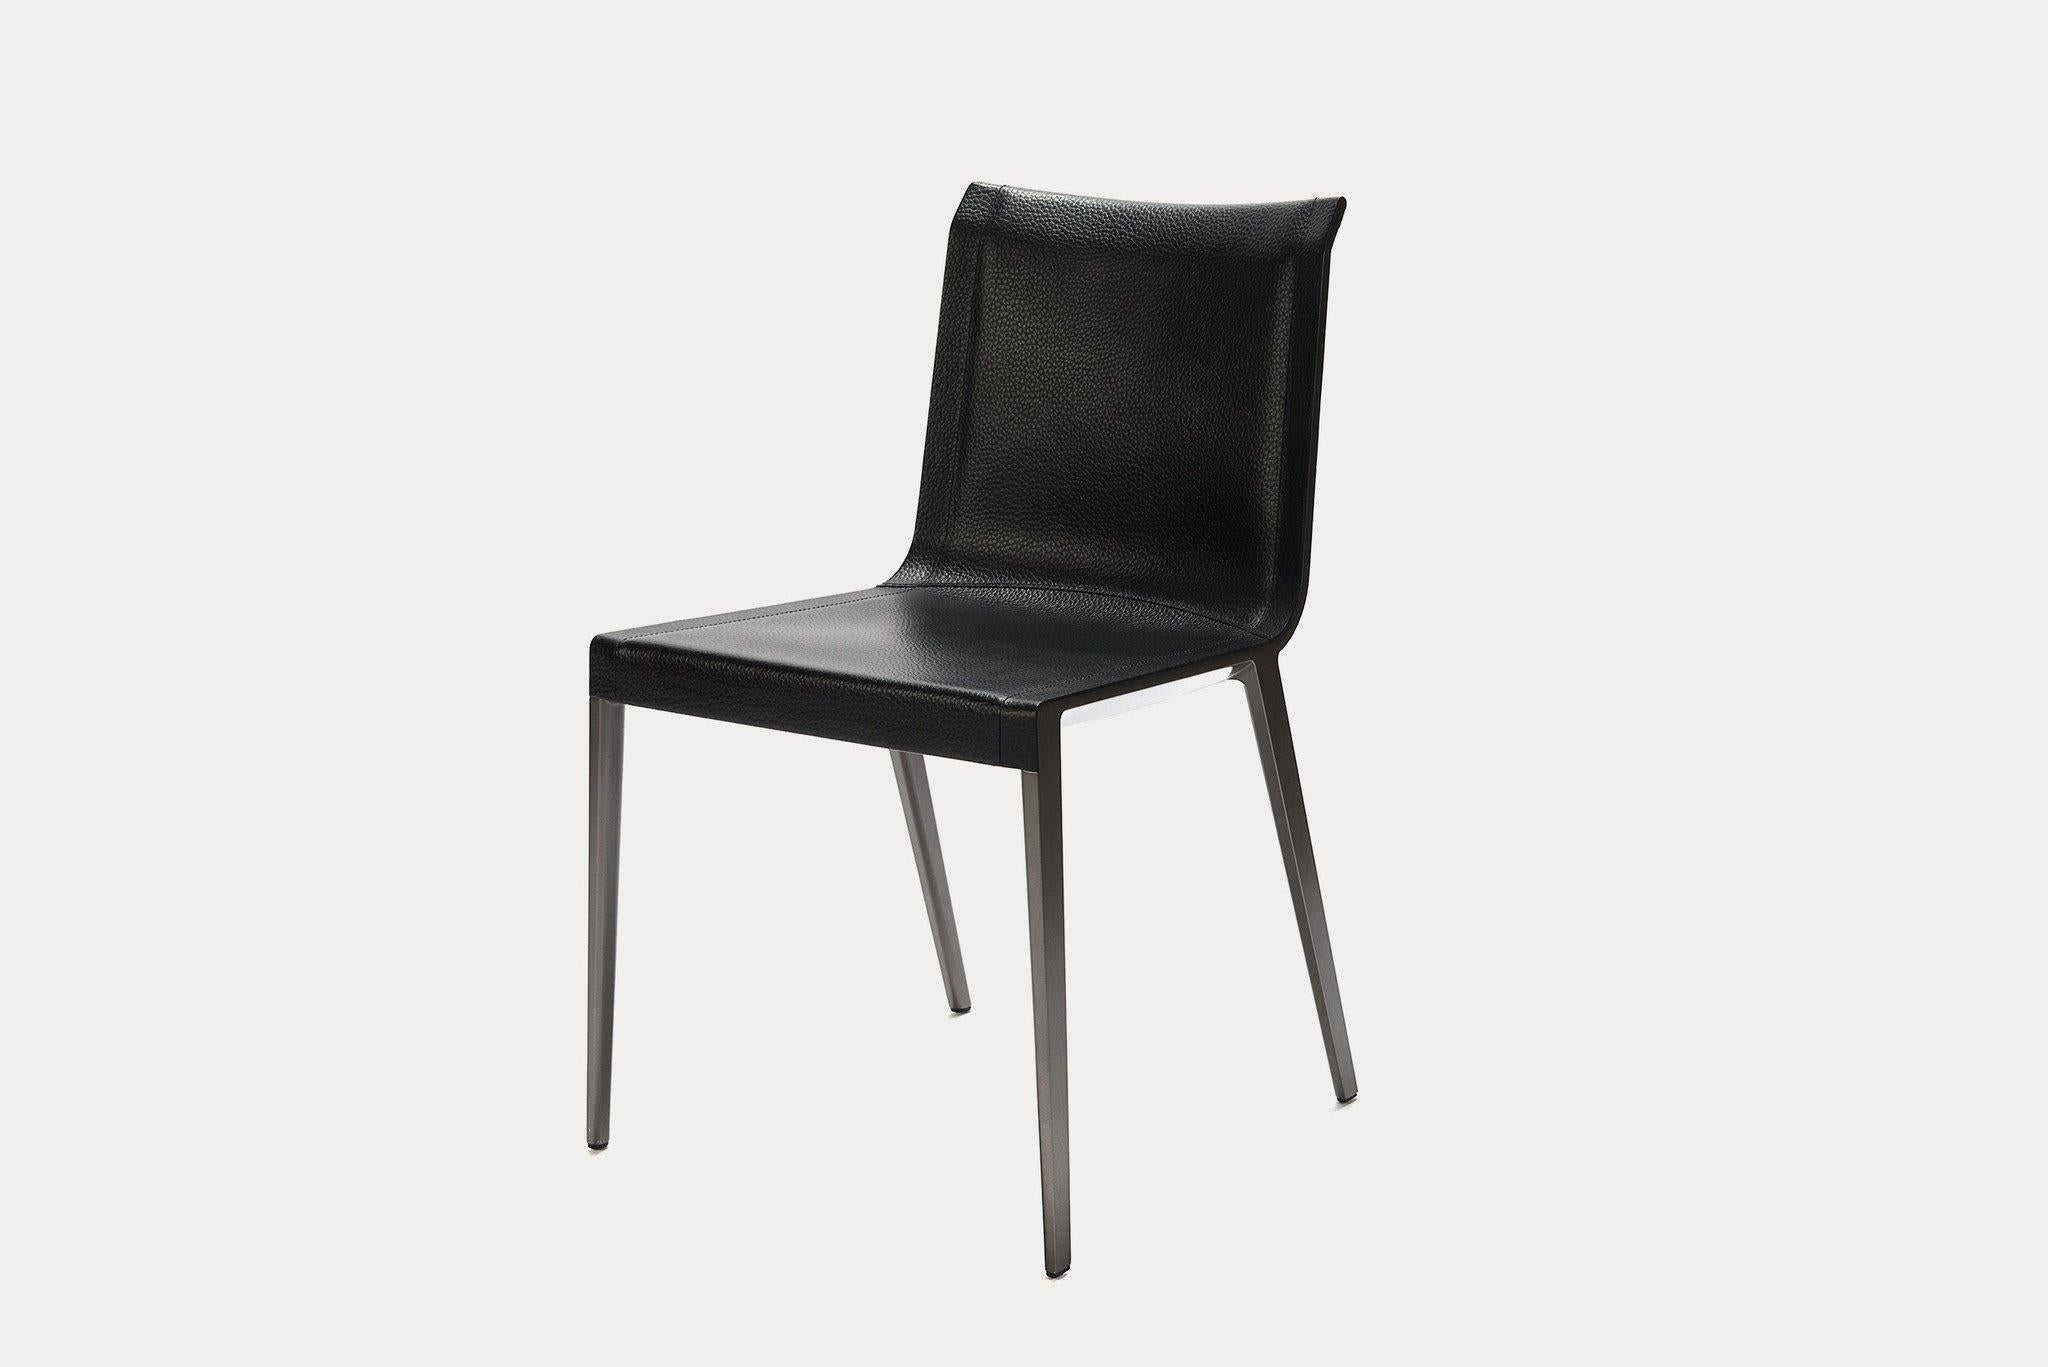 B&B Italia charlotte chair designed by Antonio Citterio is a tribute to lightness. The shell is completely covered, but the frame profile is visible on the chair side, thus highlighting the line of the seat. The cover is raw cut full grain black